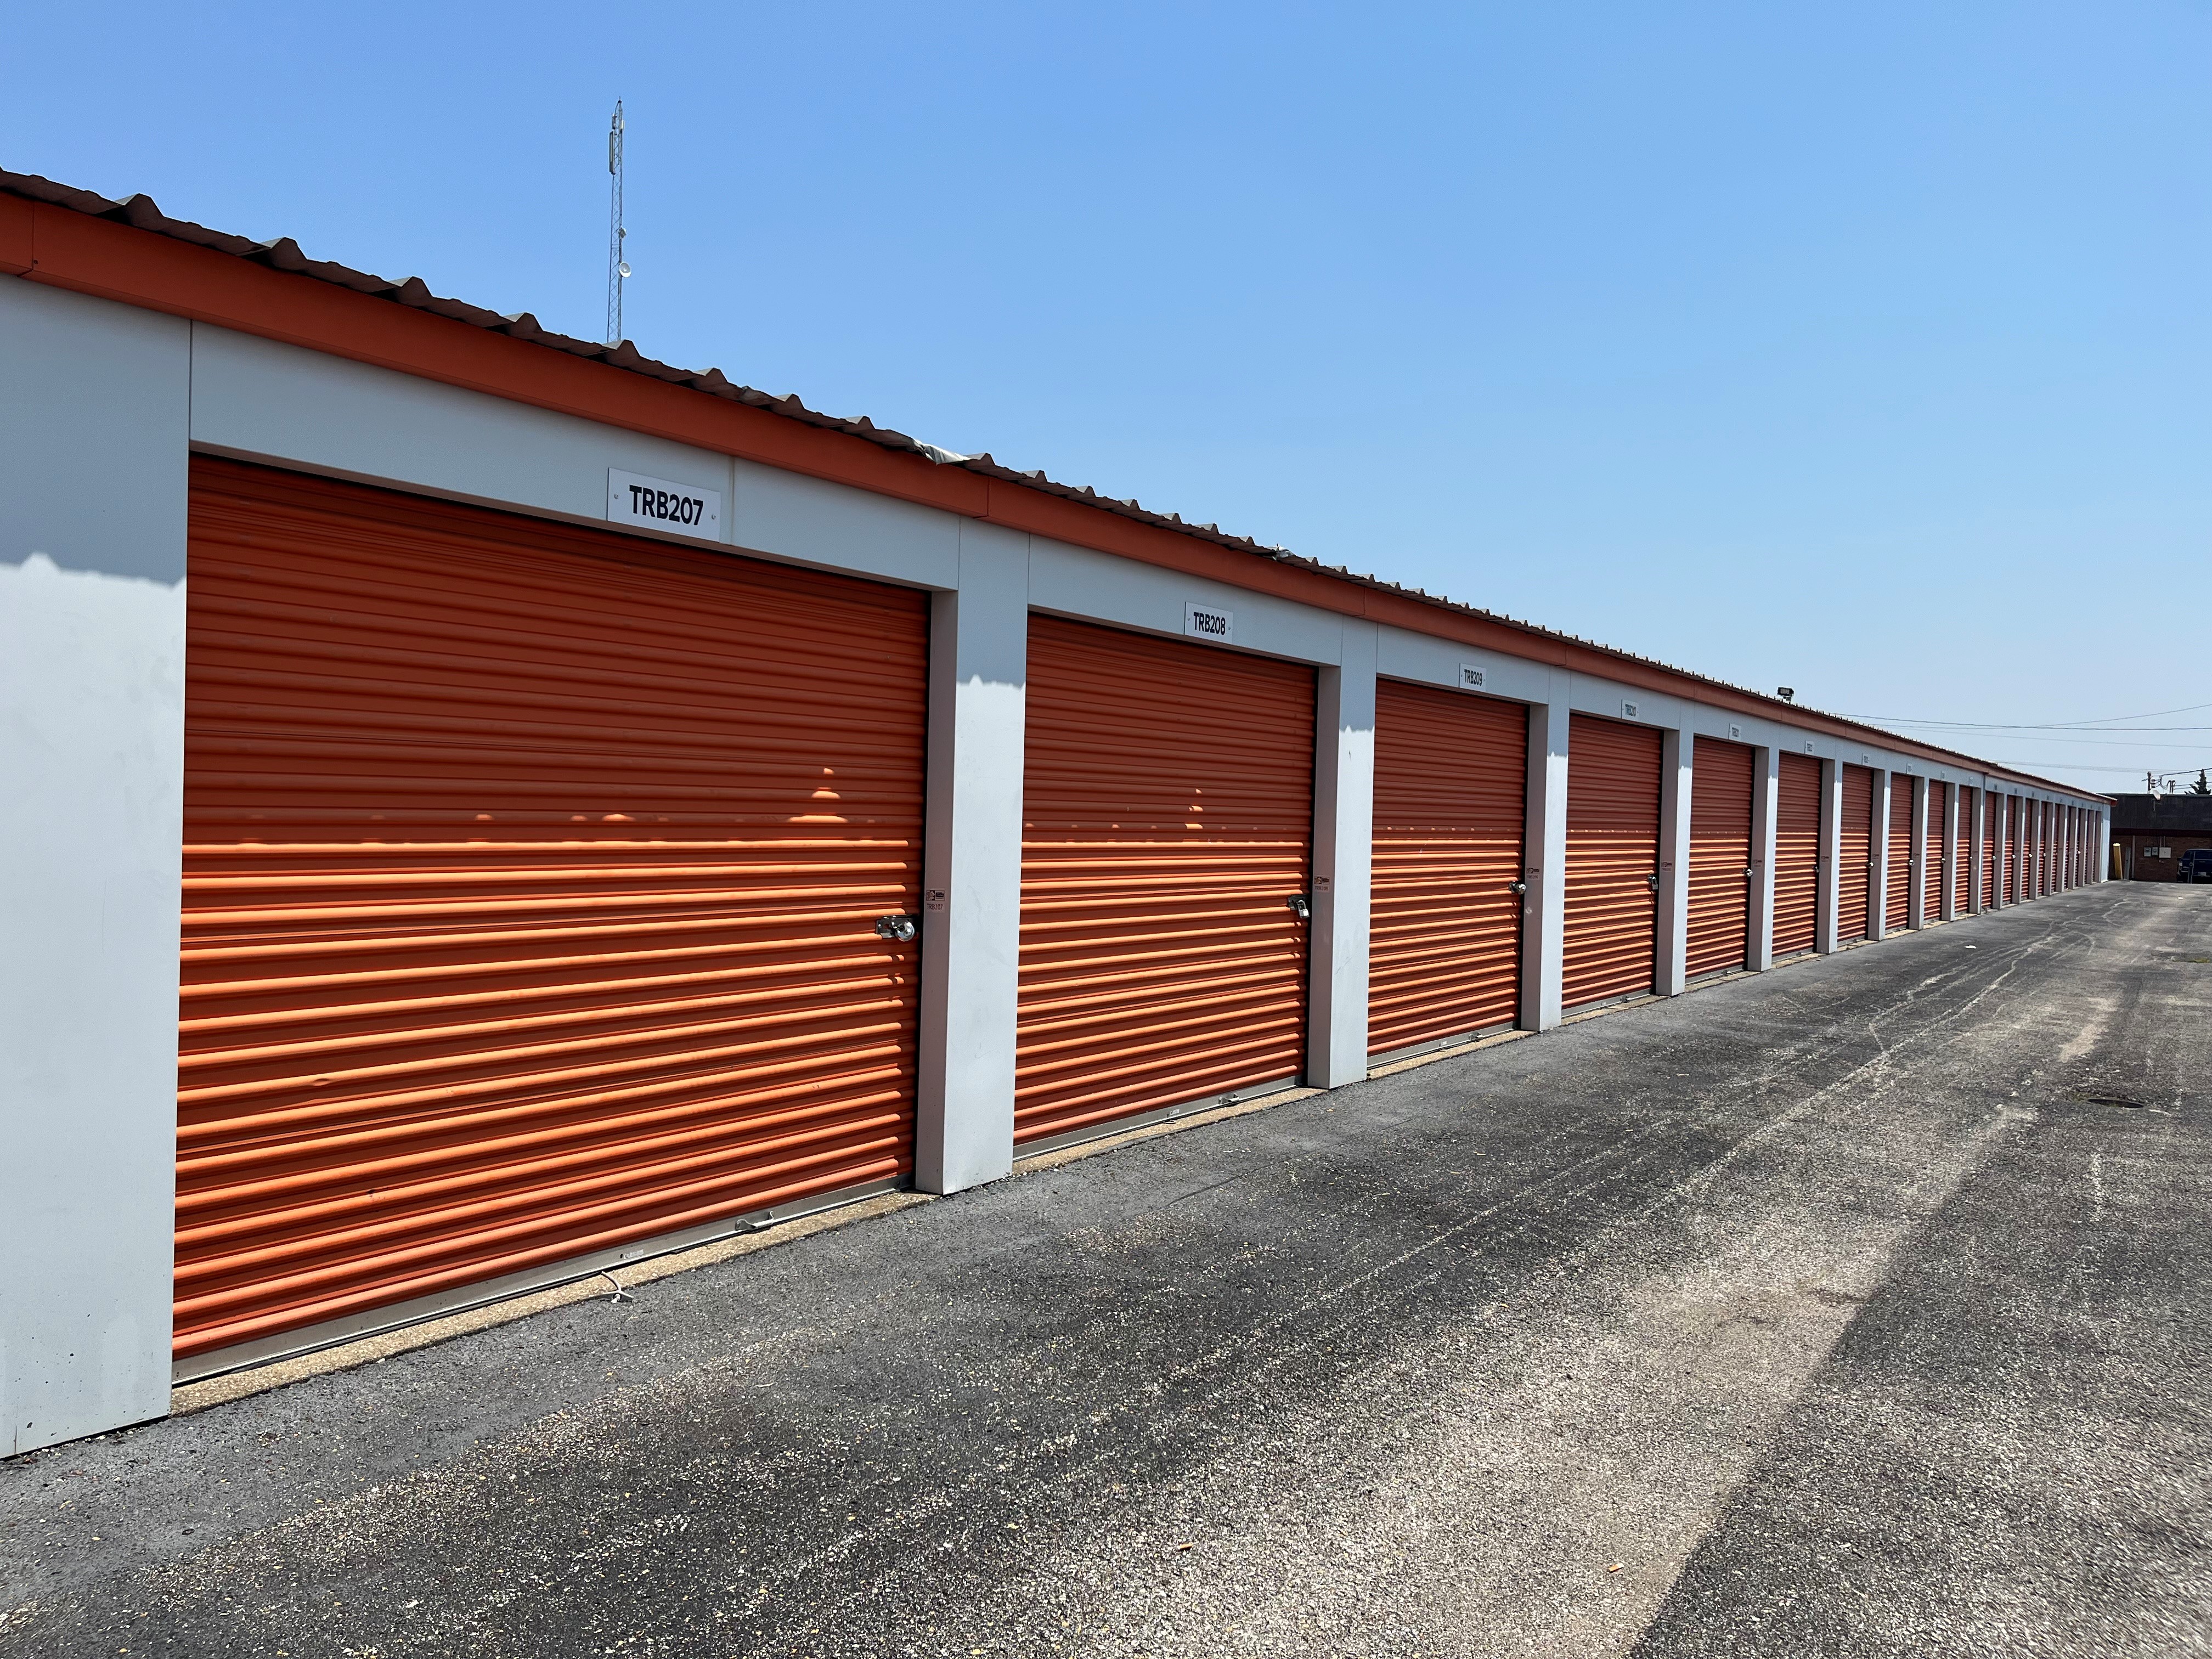 Spacious and paved driveways leading to pristine white-door storage units at Truman Rd, Jasper, ensuring a clean, well-kept facility.